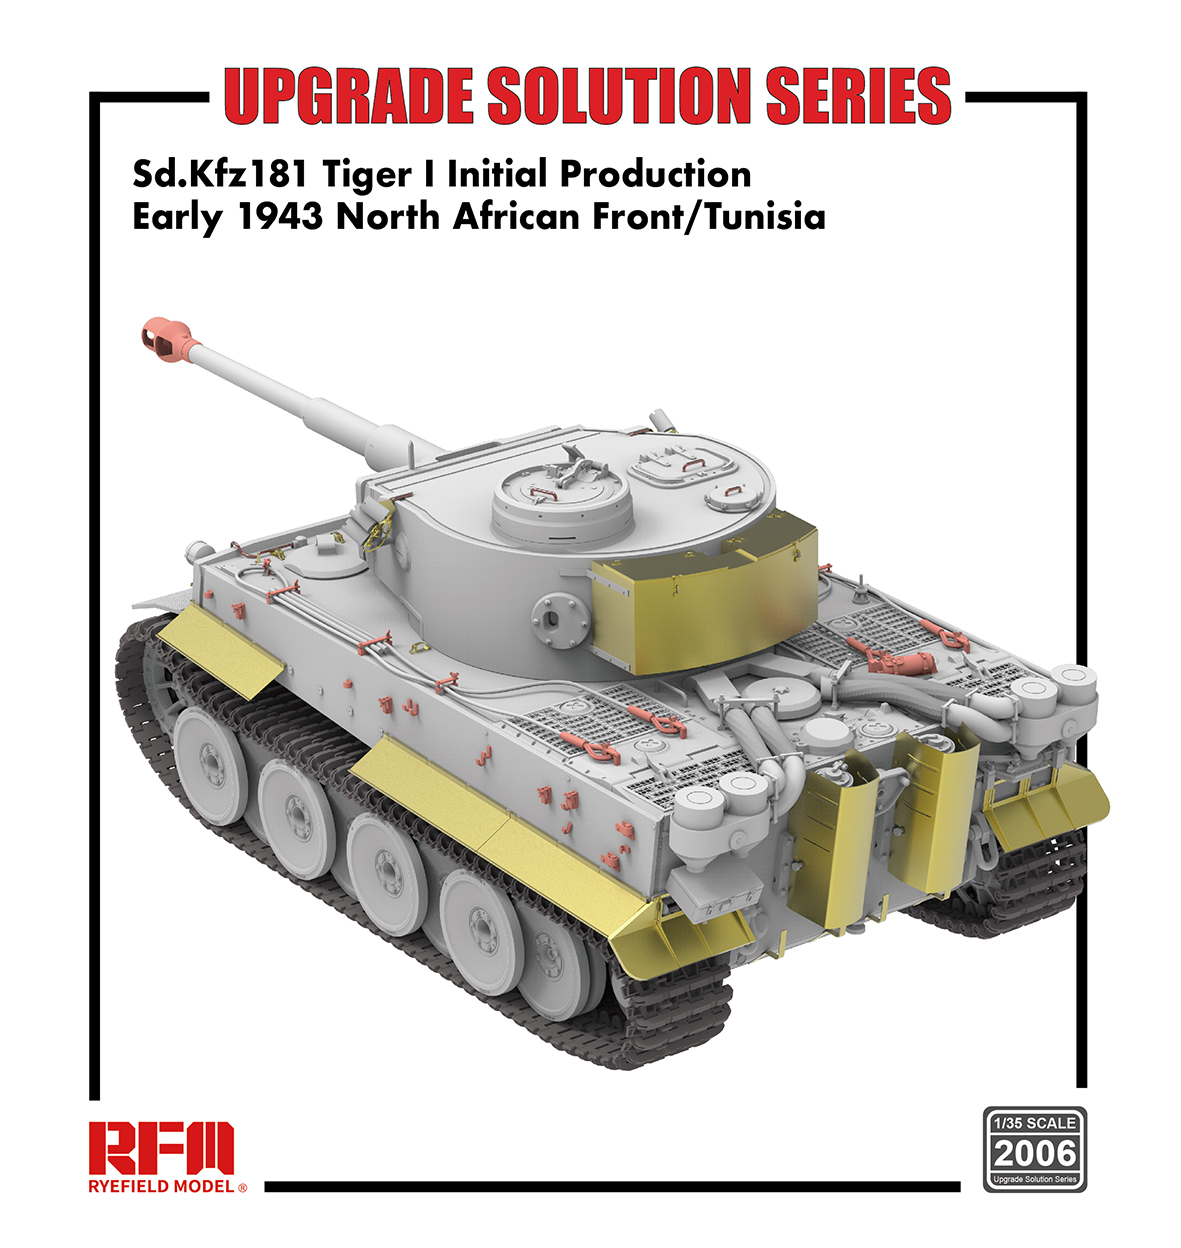 Tiger I initial 1943 production - upgrade solution